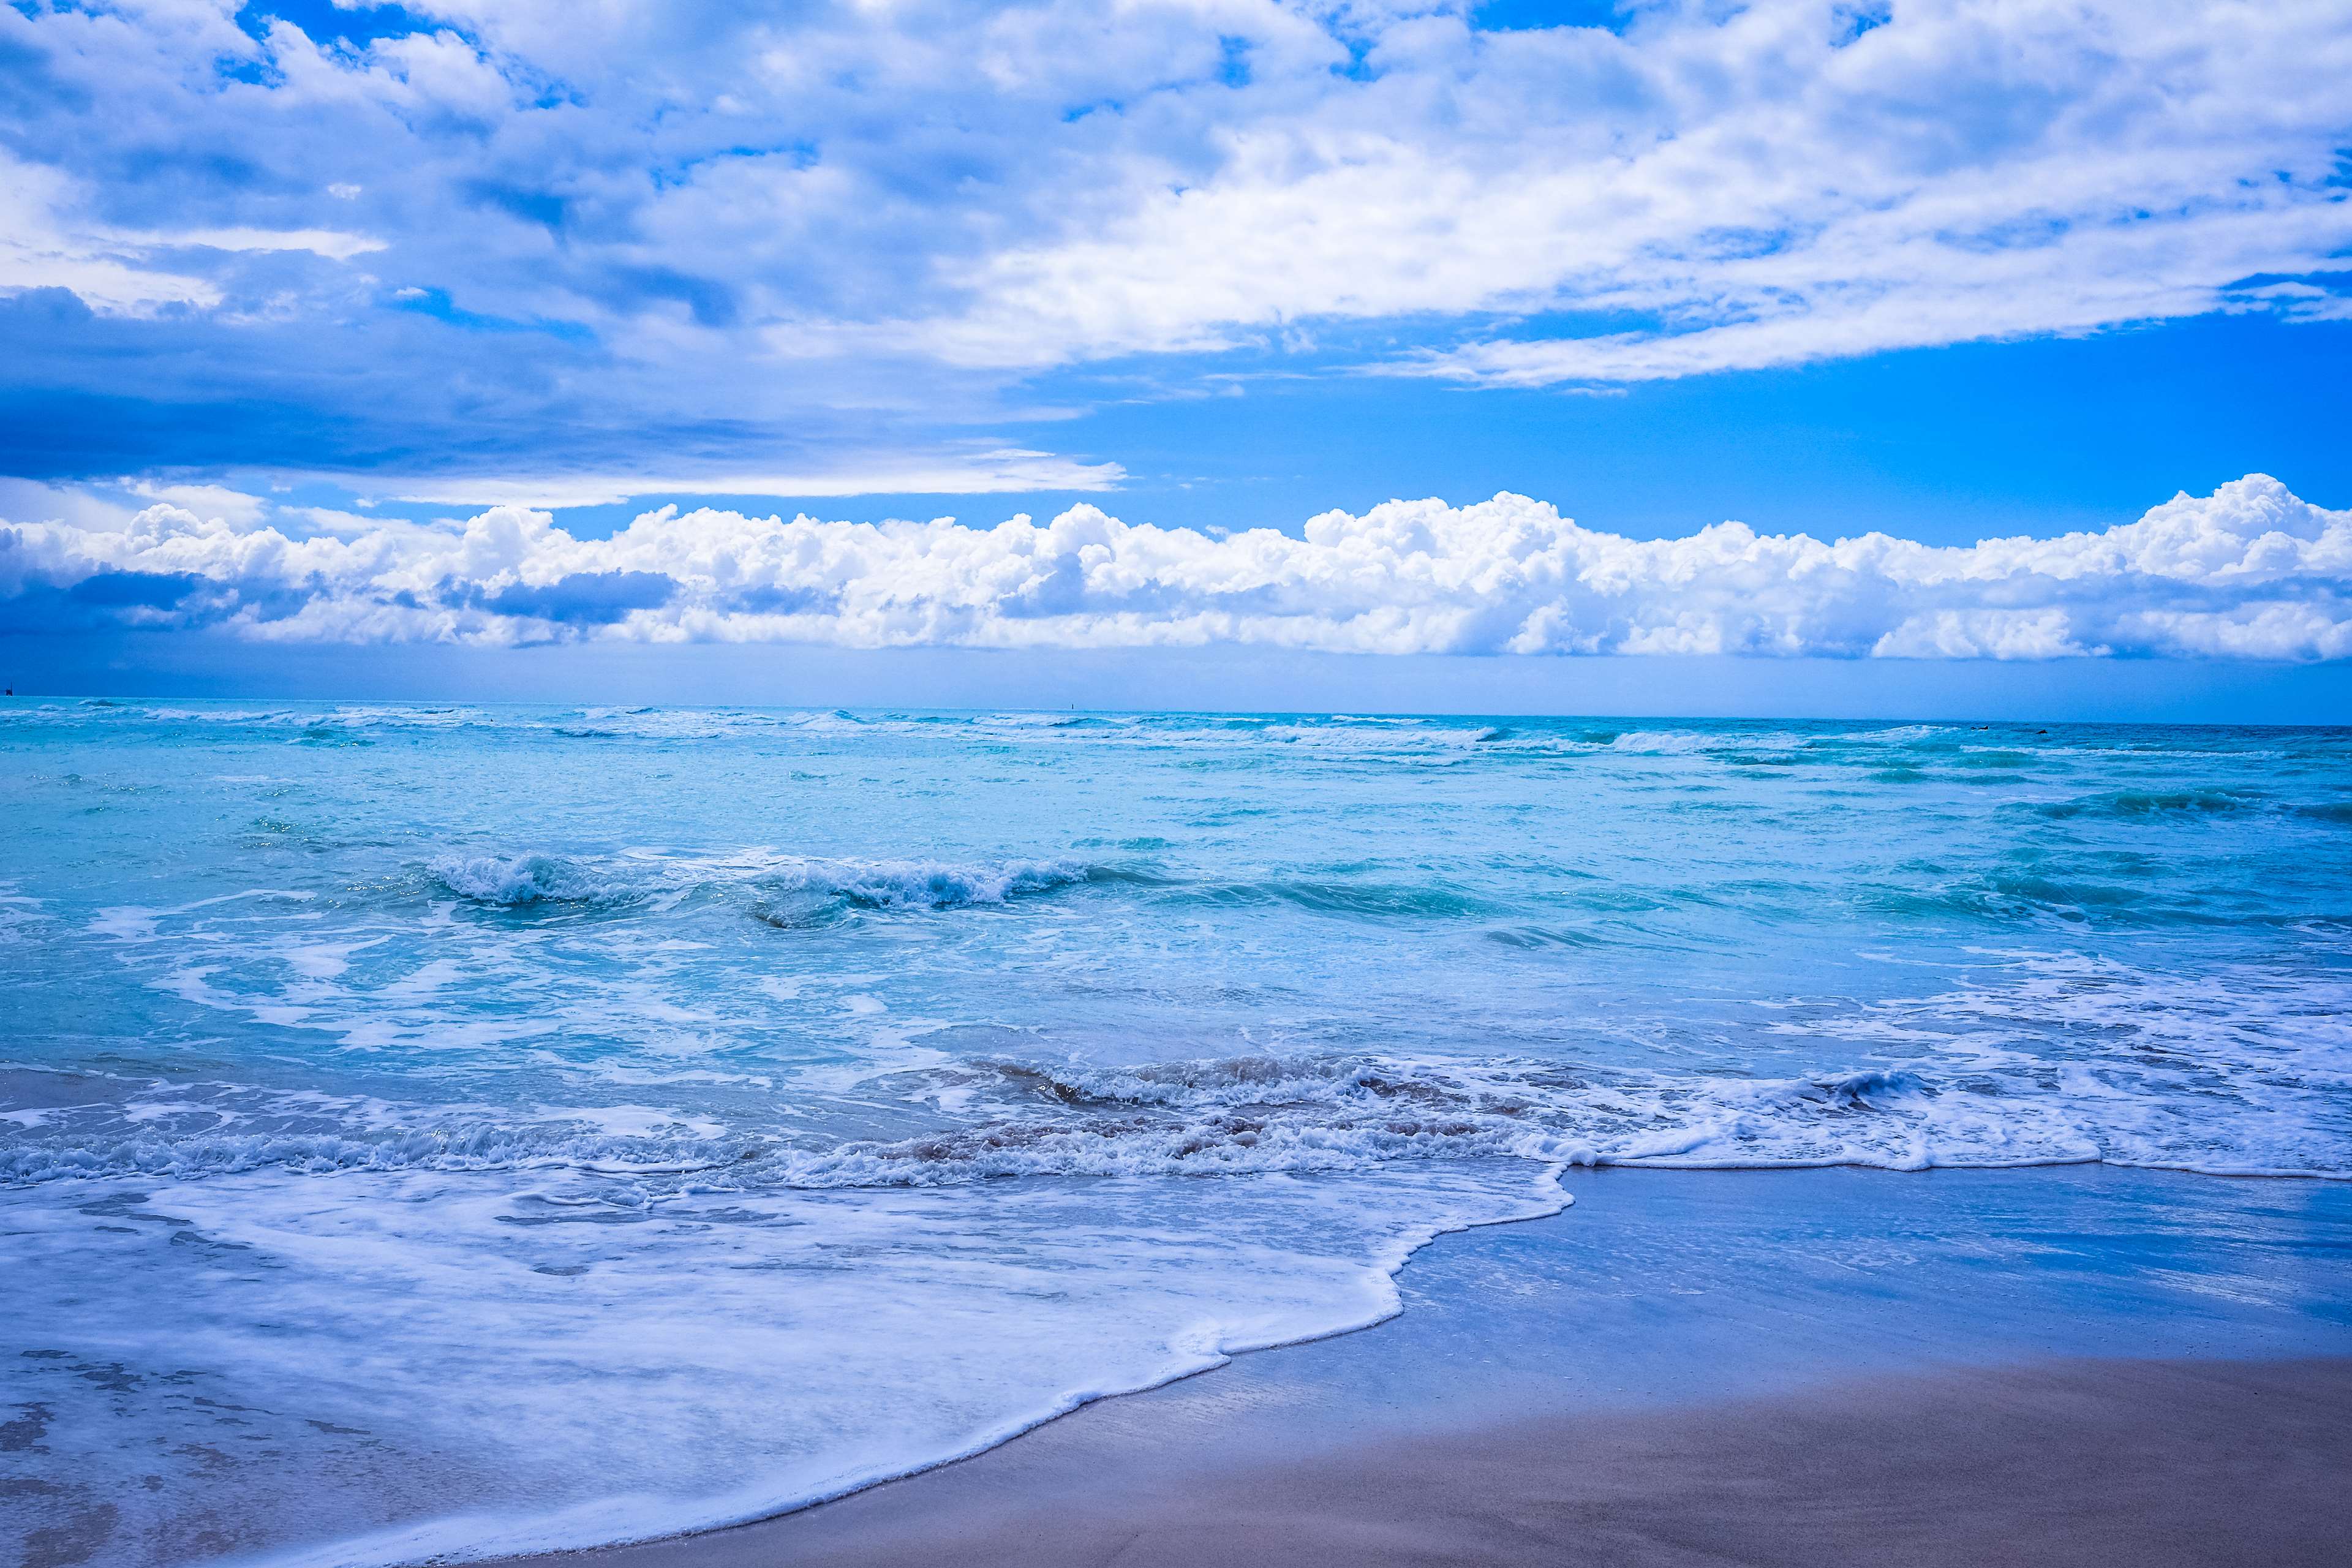 A beach with waves and blue water - Ocean